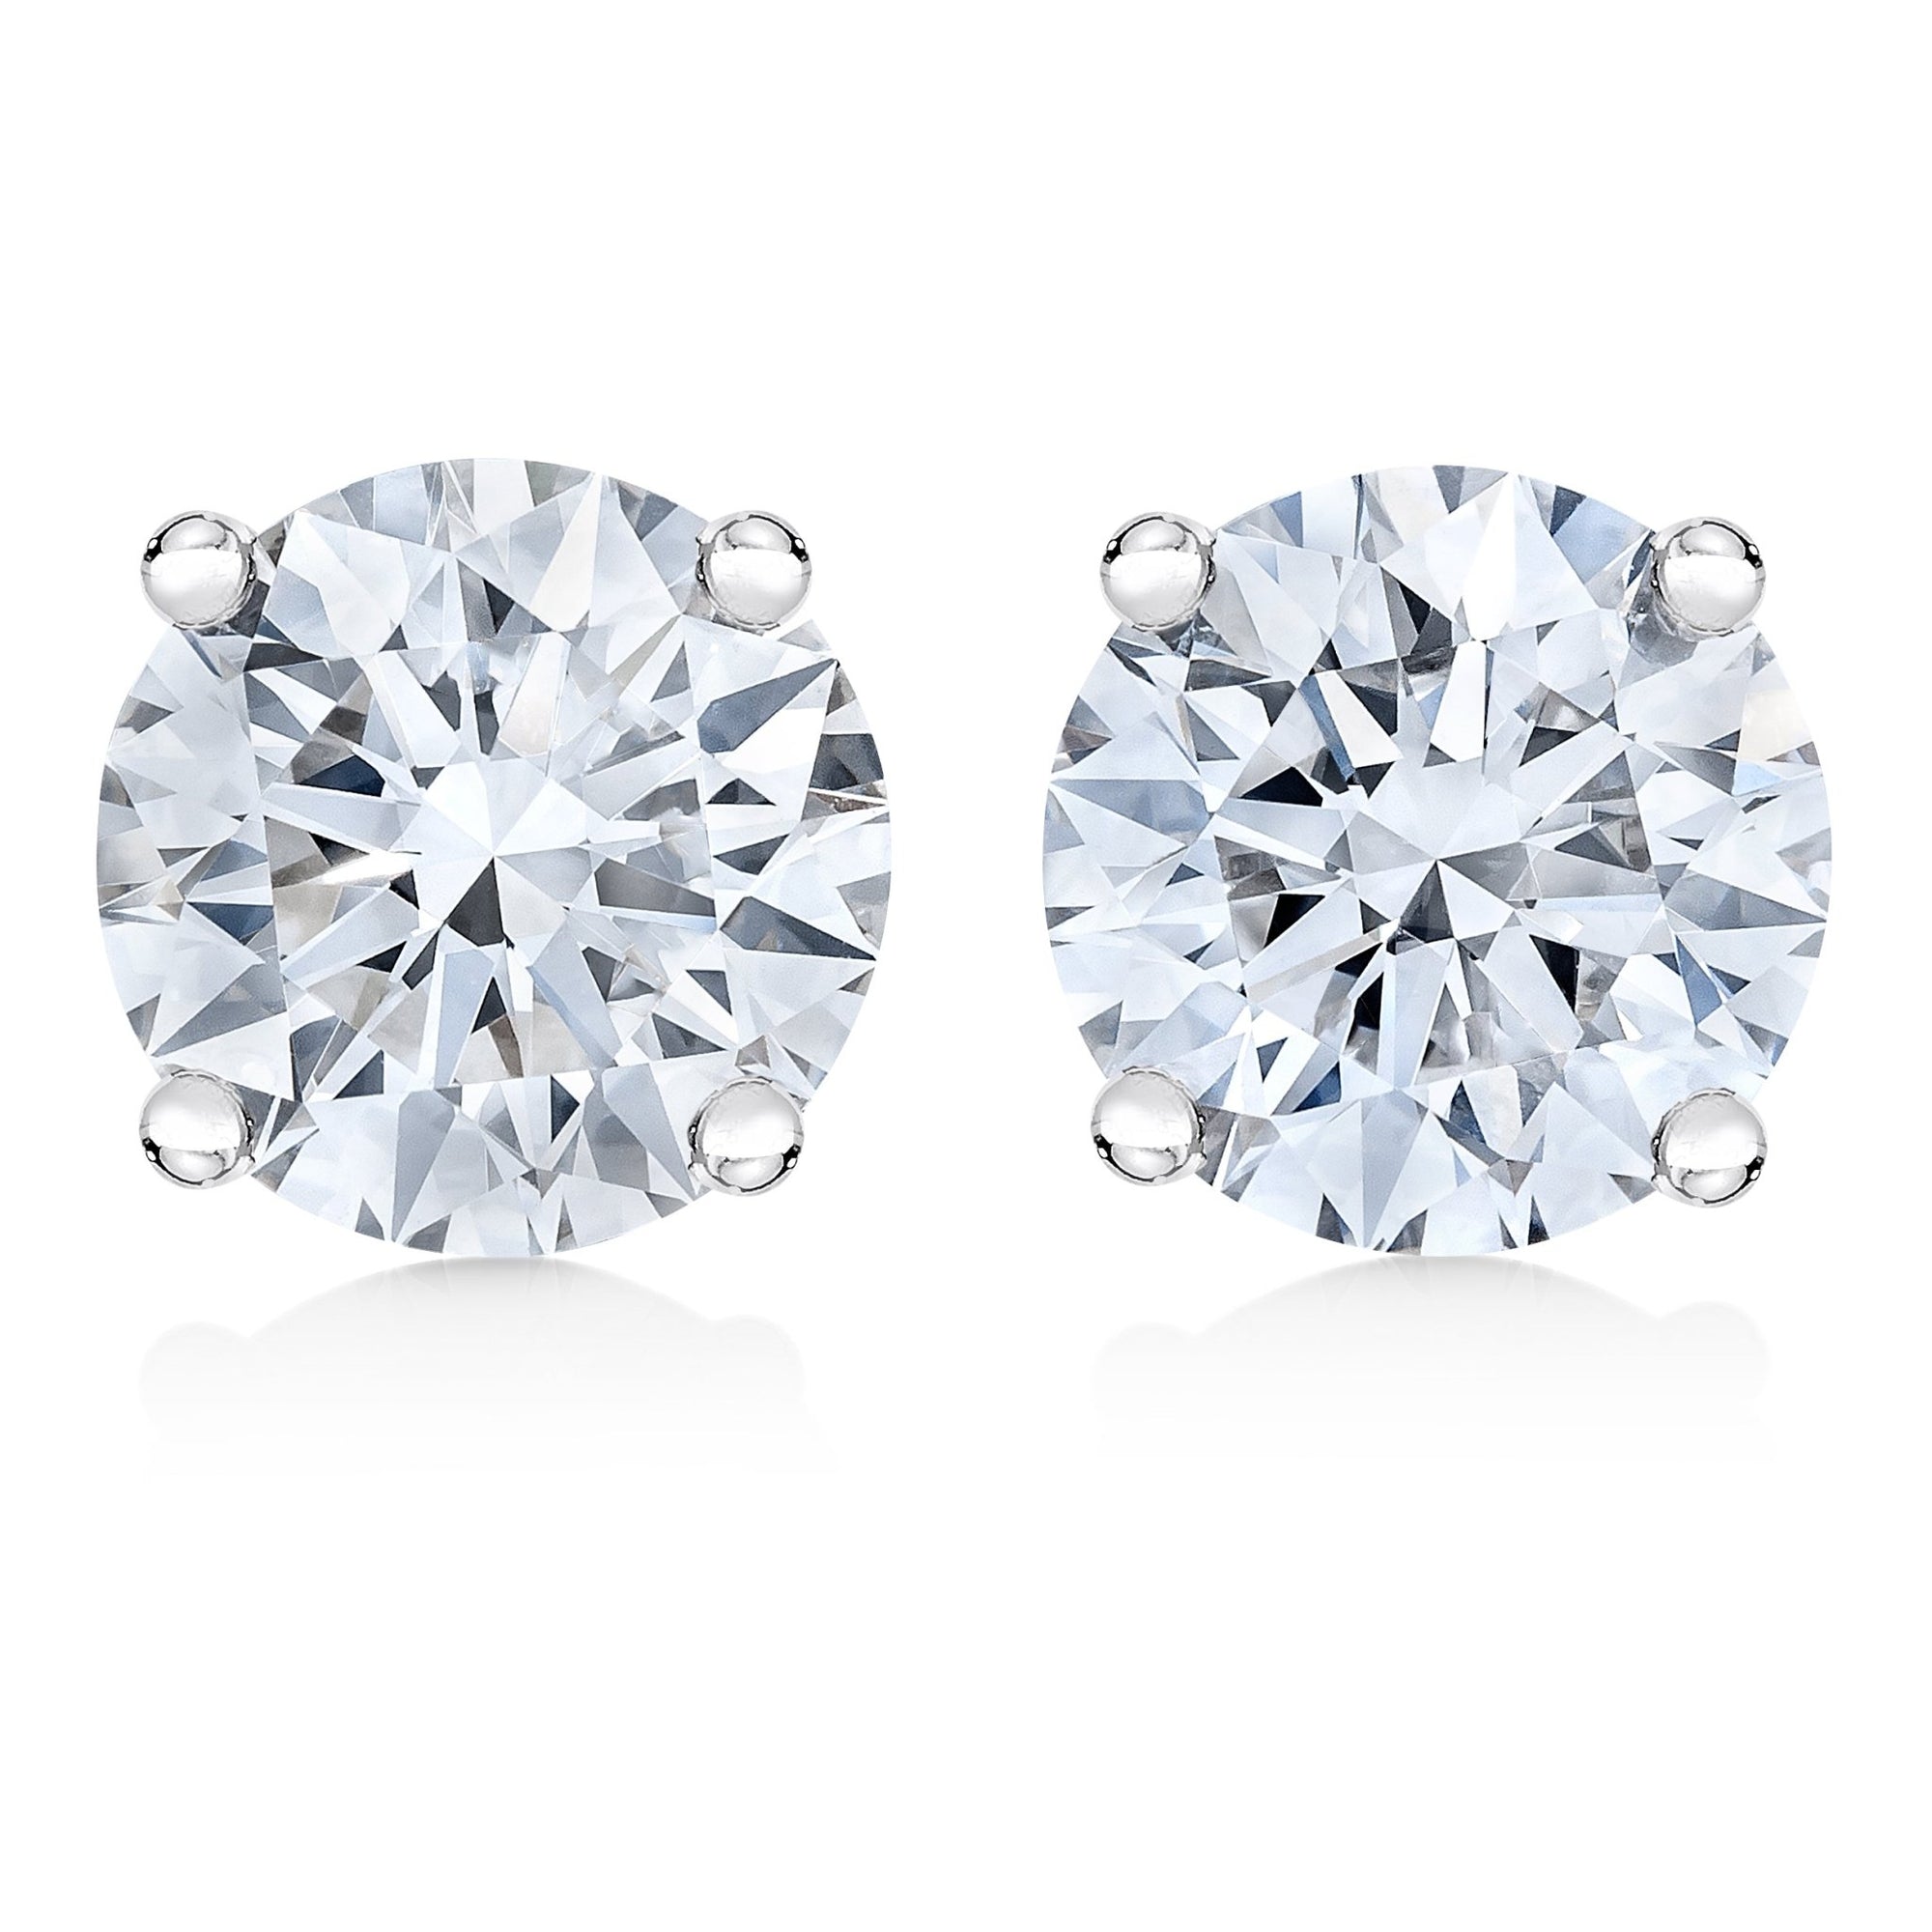 AGS Certified 14K White Gold 1.0 Cttw 4-Prong Set Brilliant Round-Cut Solitaire Diamond Push Back Stud Earrings (H-I Color, SI2-I1 Clarity) - LinkagejewelrydesignLinkagejewelrydesign